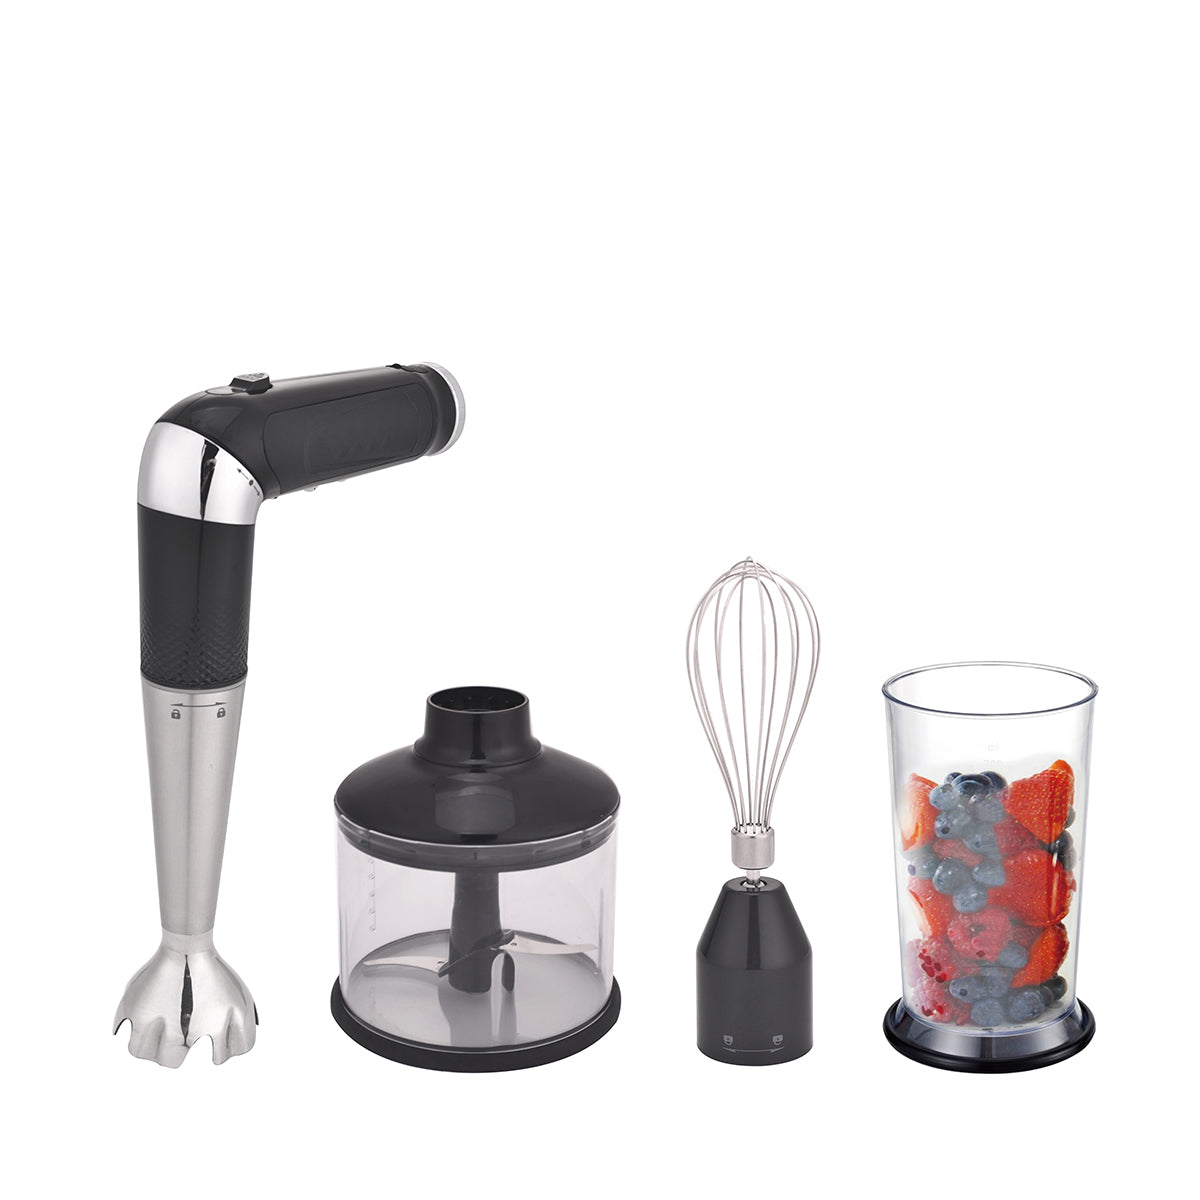 Sleek black & silver cordless stick hand blender with attachments.